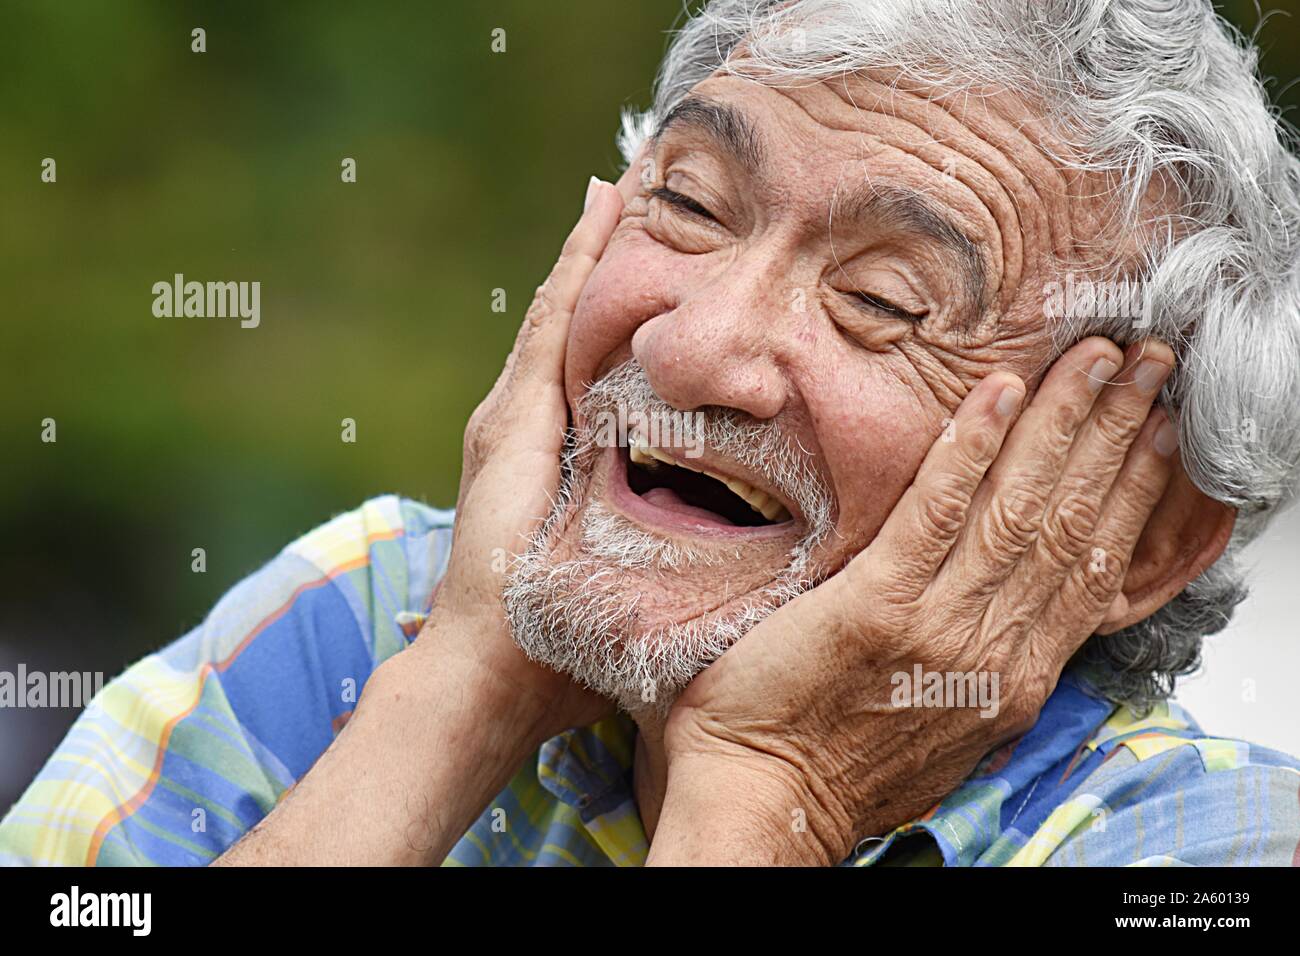 An Old Male And Laughter Stock Photo